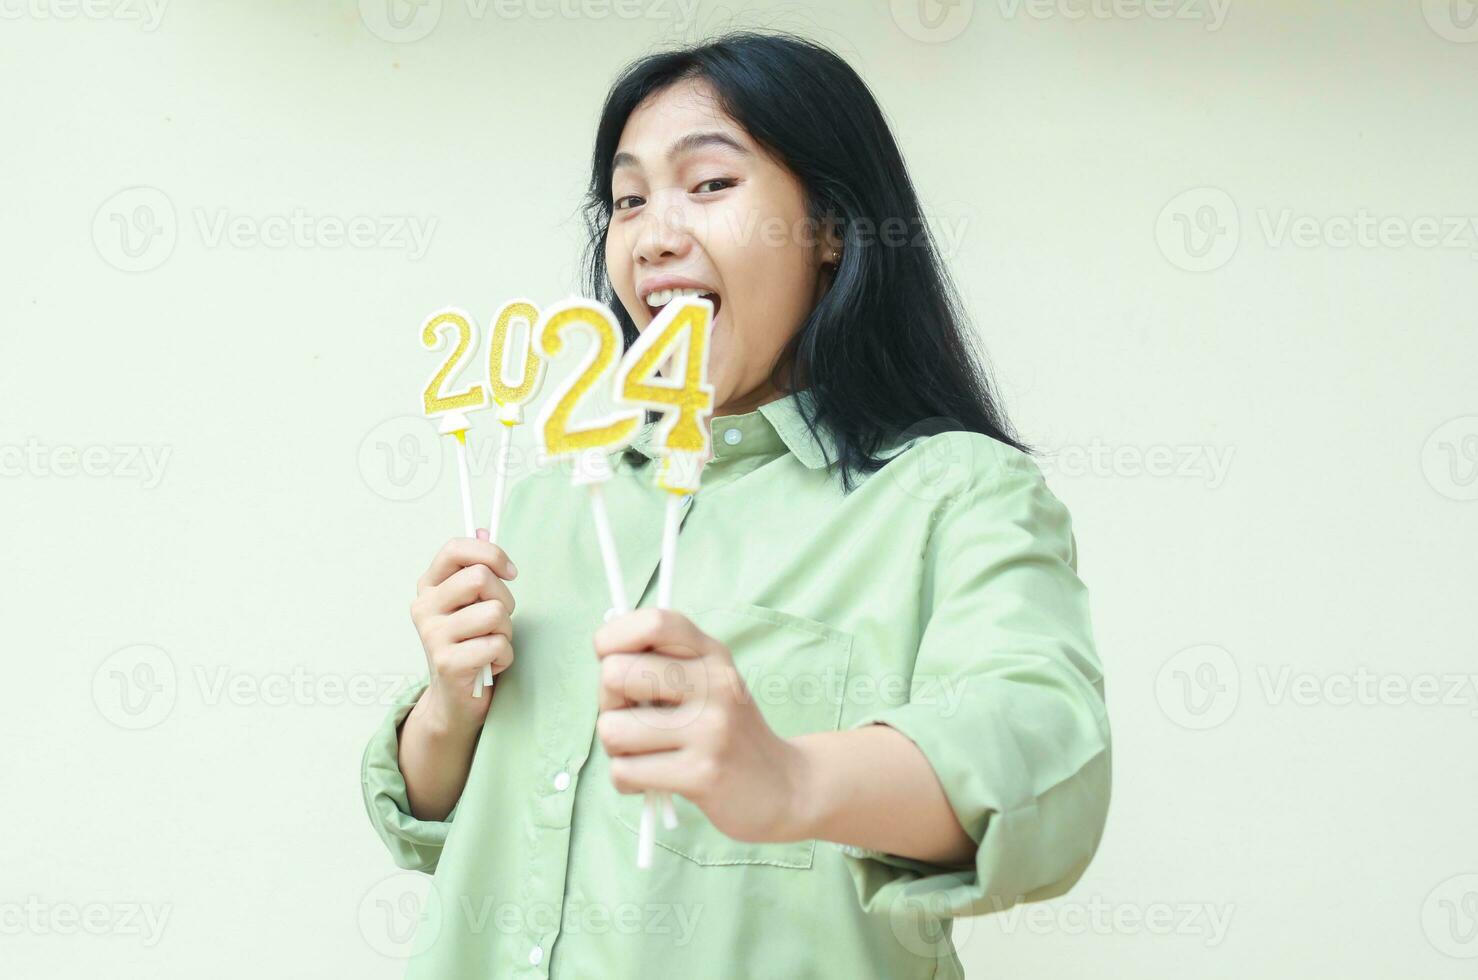 shocked asian young woman raising arm with number 24 of 2024 number candles holding on hand, female hipster wearing green casual over size shirt, isolated on white photo